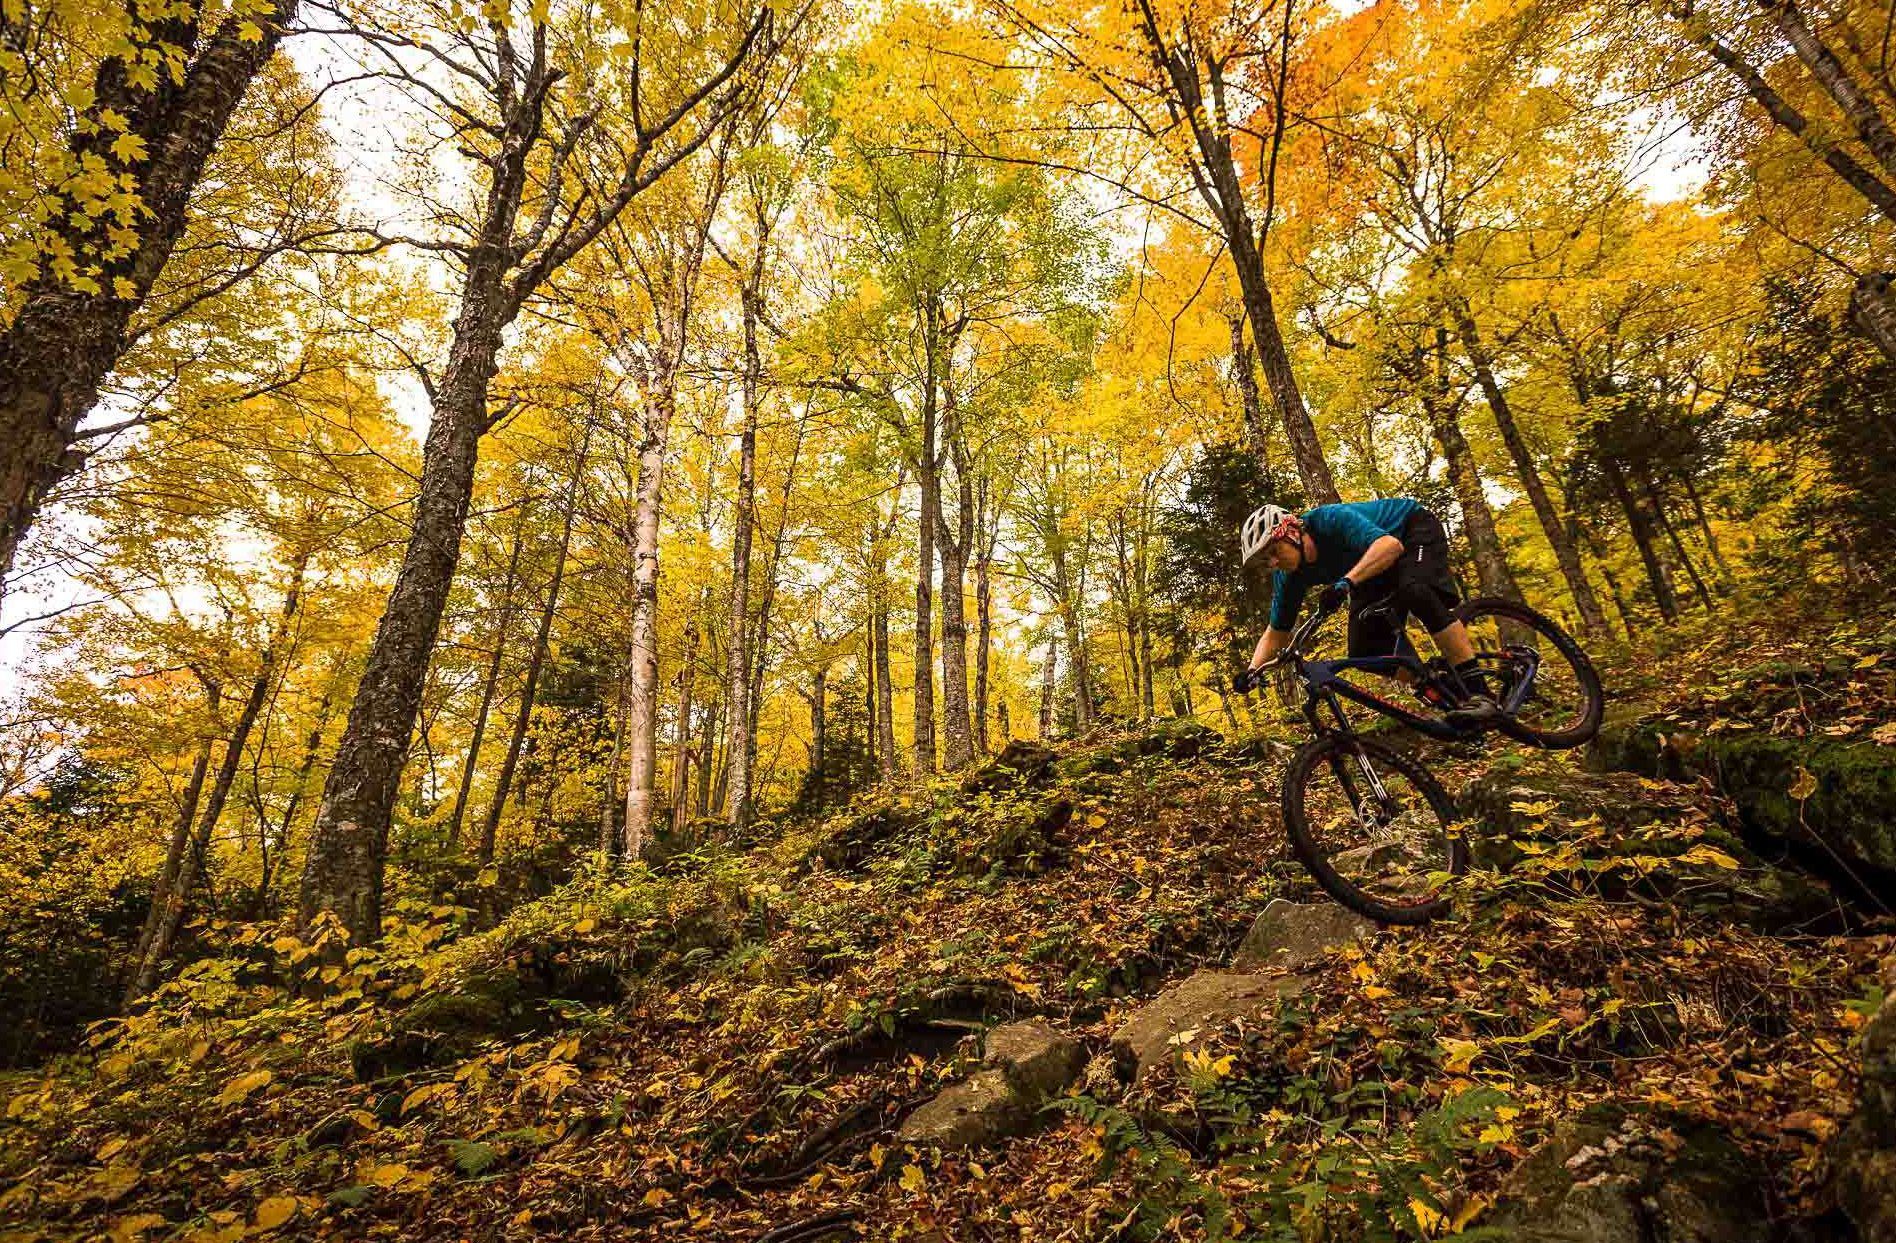 How To Find The Worlds Best Mountain Bike Trails Reviewthis